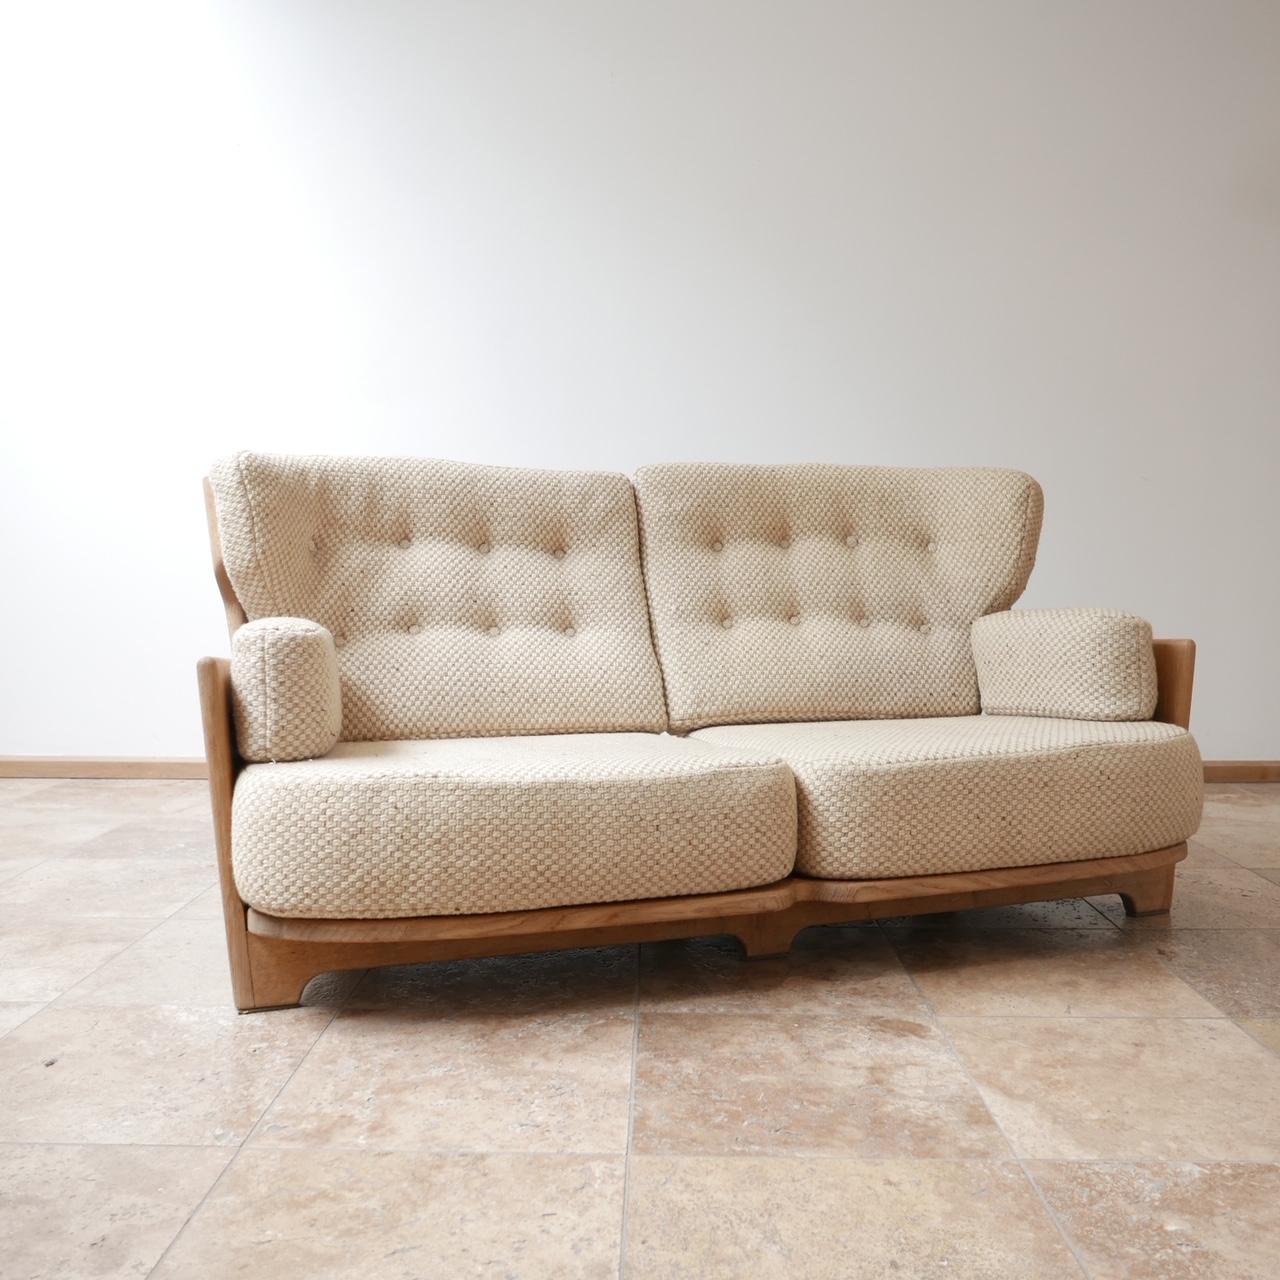 Mid-20th Century Guillerme et Chambron Rare Midcentury French Sofa